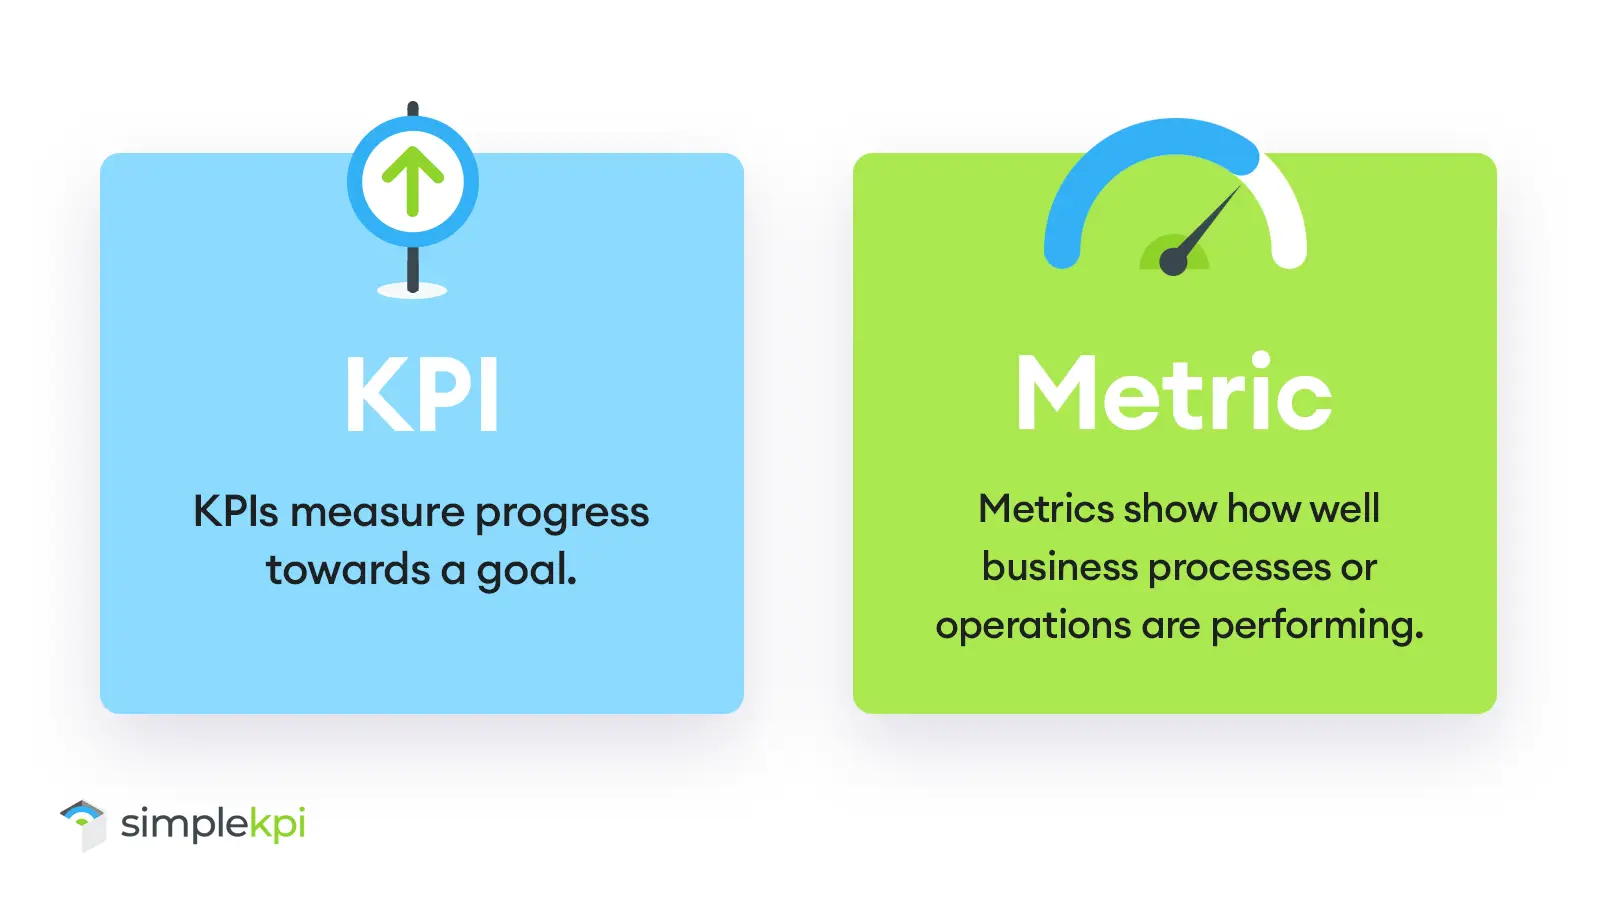 The difference between KPIs and Metrics